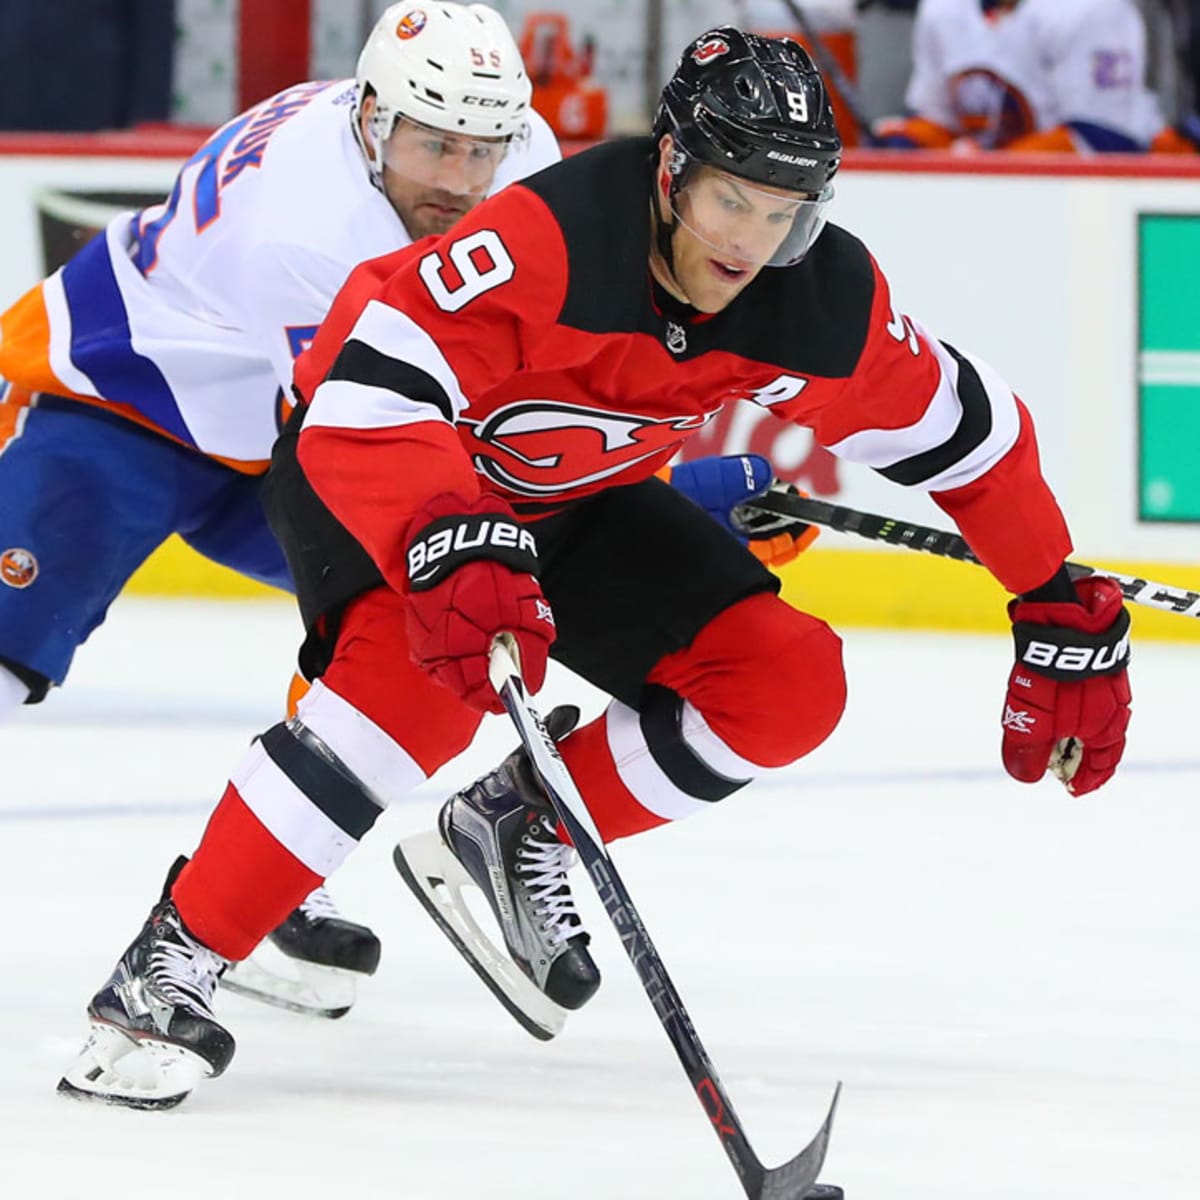 Taylor Hall scores twice as Devils win home opener